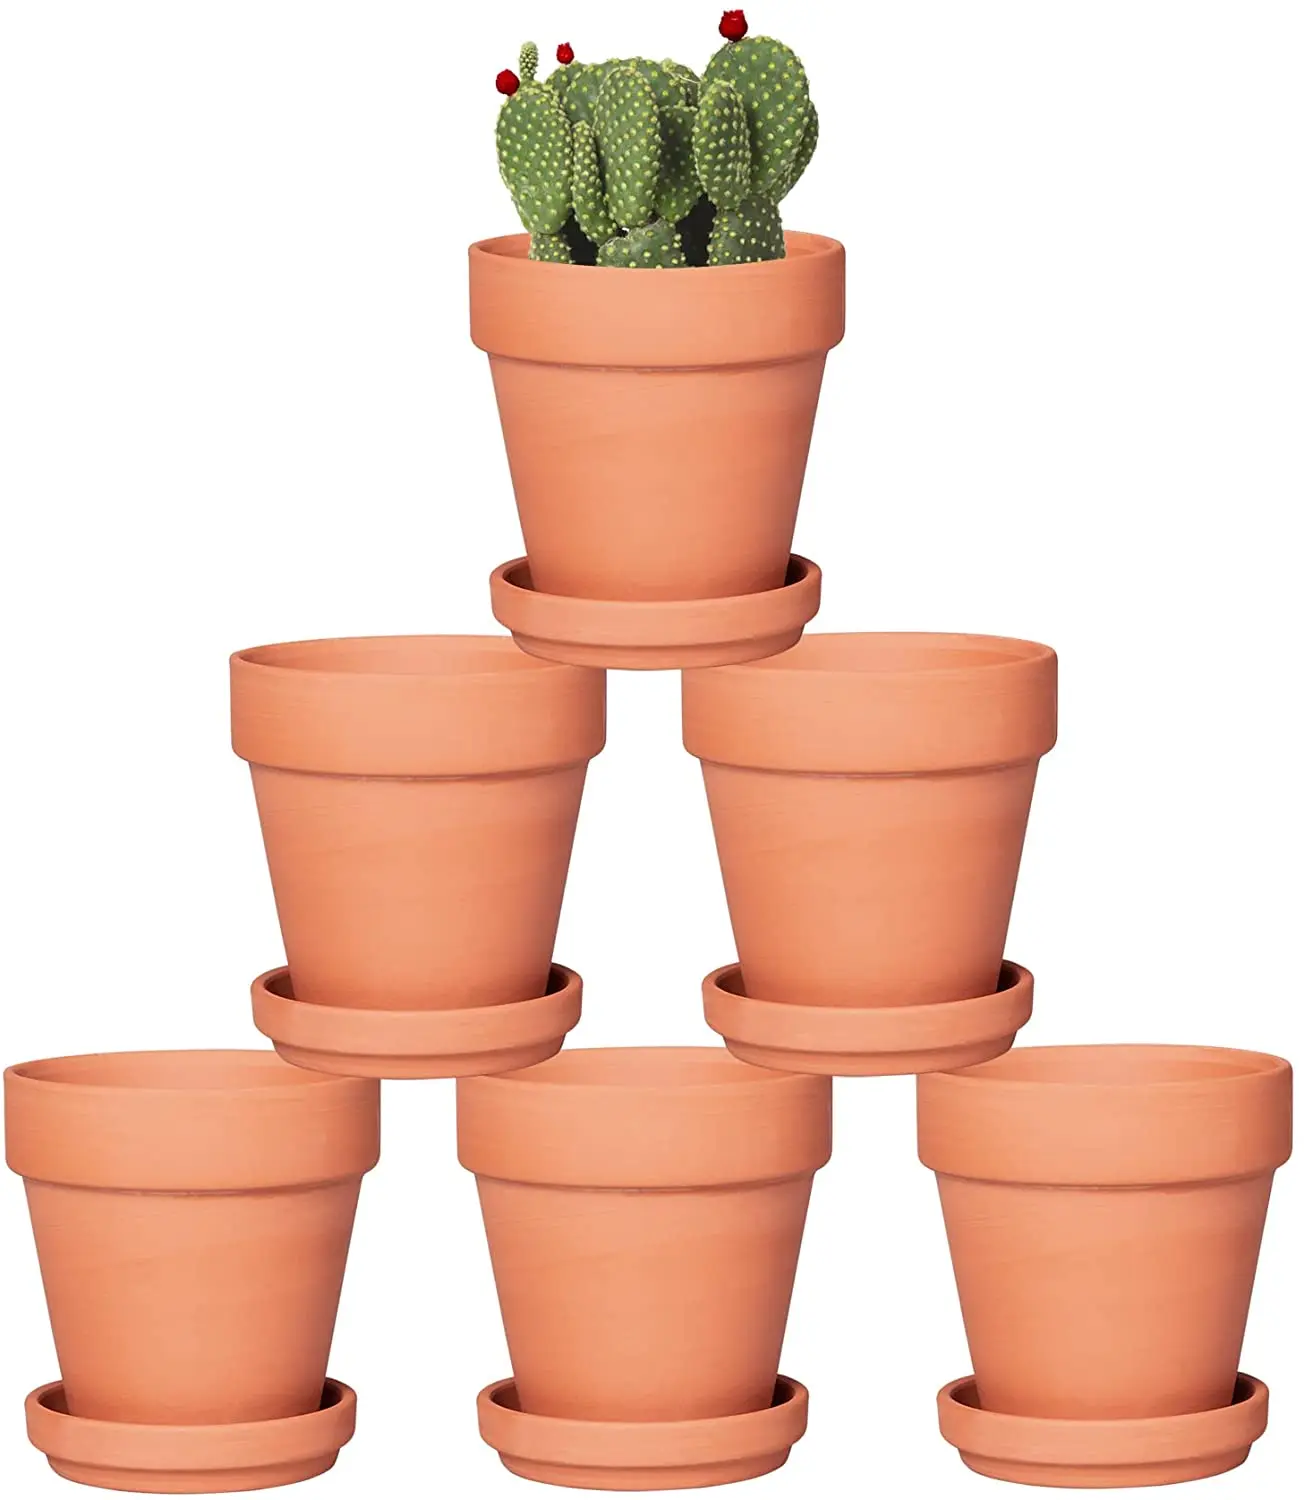 

6 Pcs 3.2'' Clay Pots with Saucer Pottery Planter Cactus Flower Pots Succulent Pot with Drainage Hole- Great for Plants,Crafts